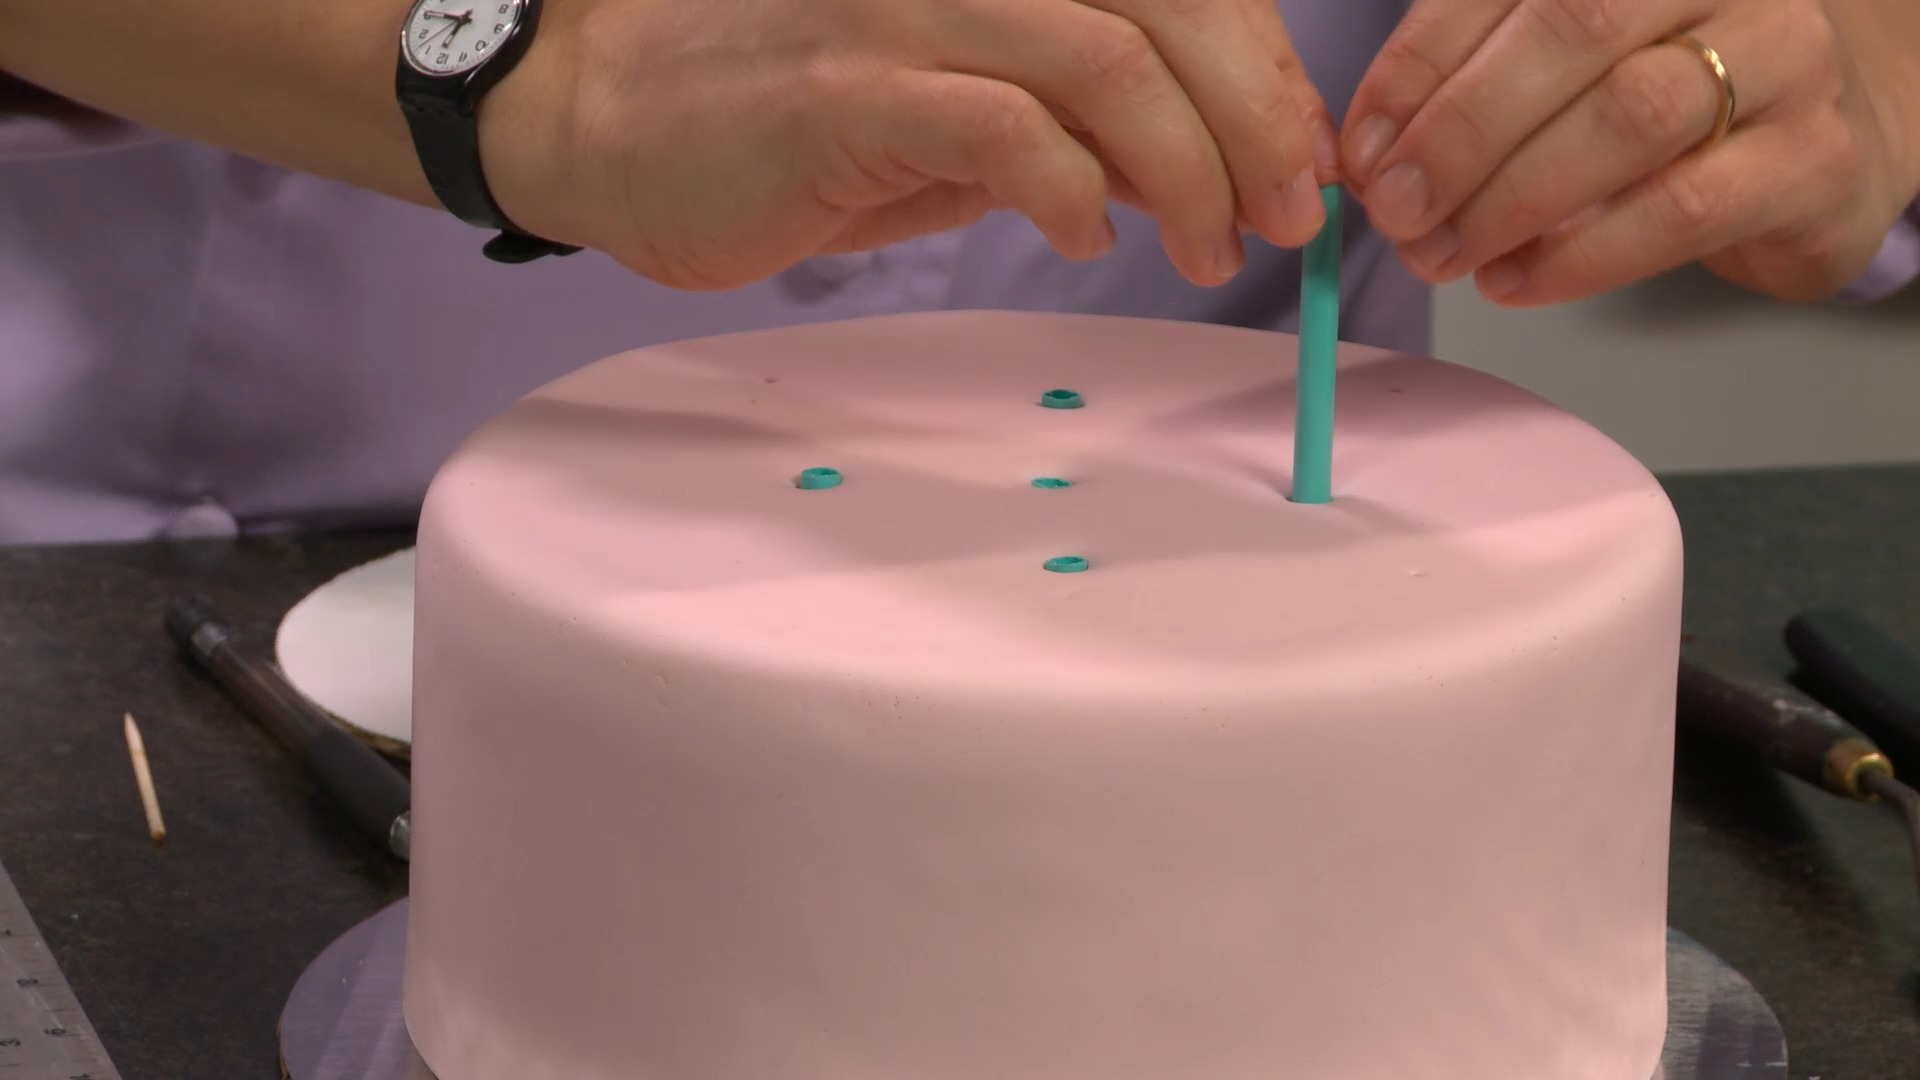 Doweling a Two-Tier Cake